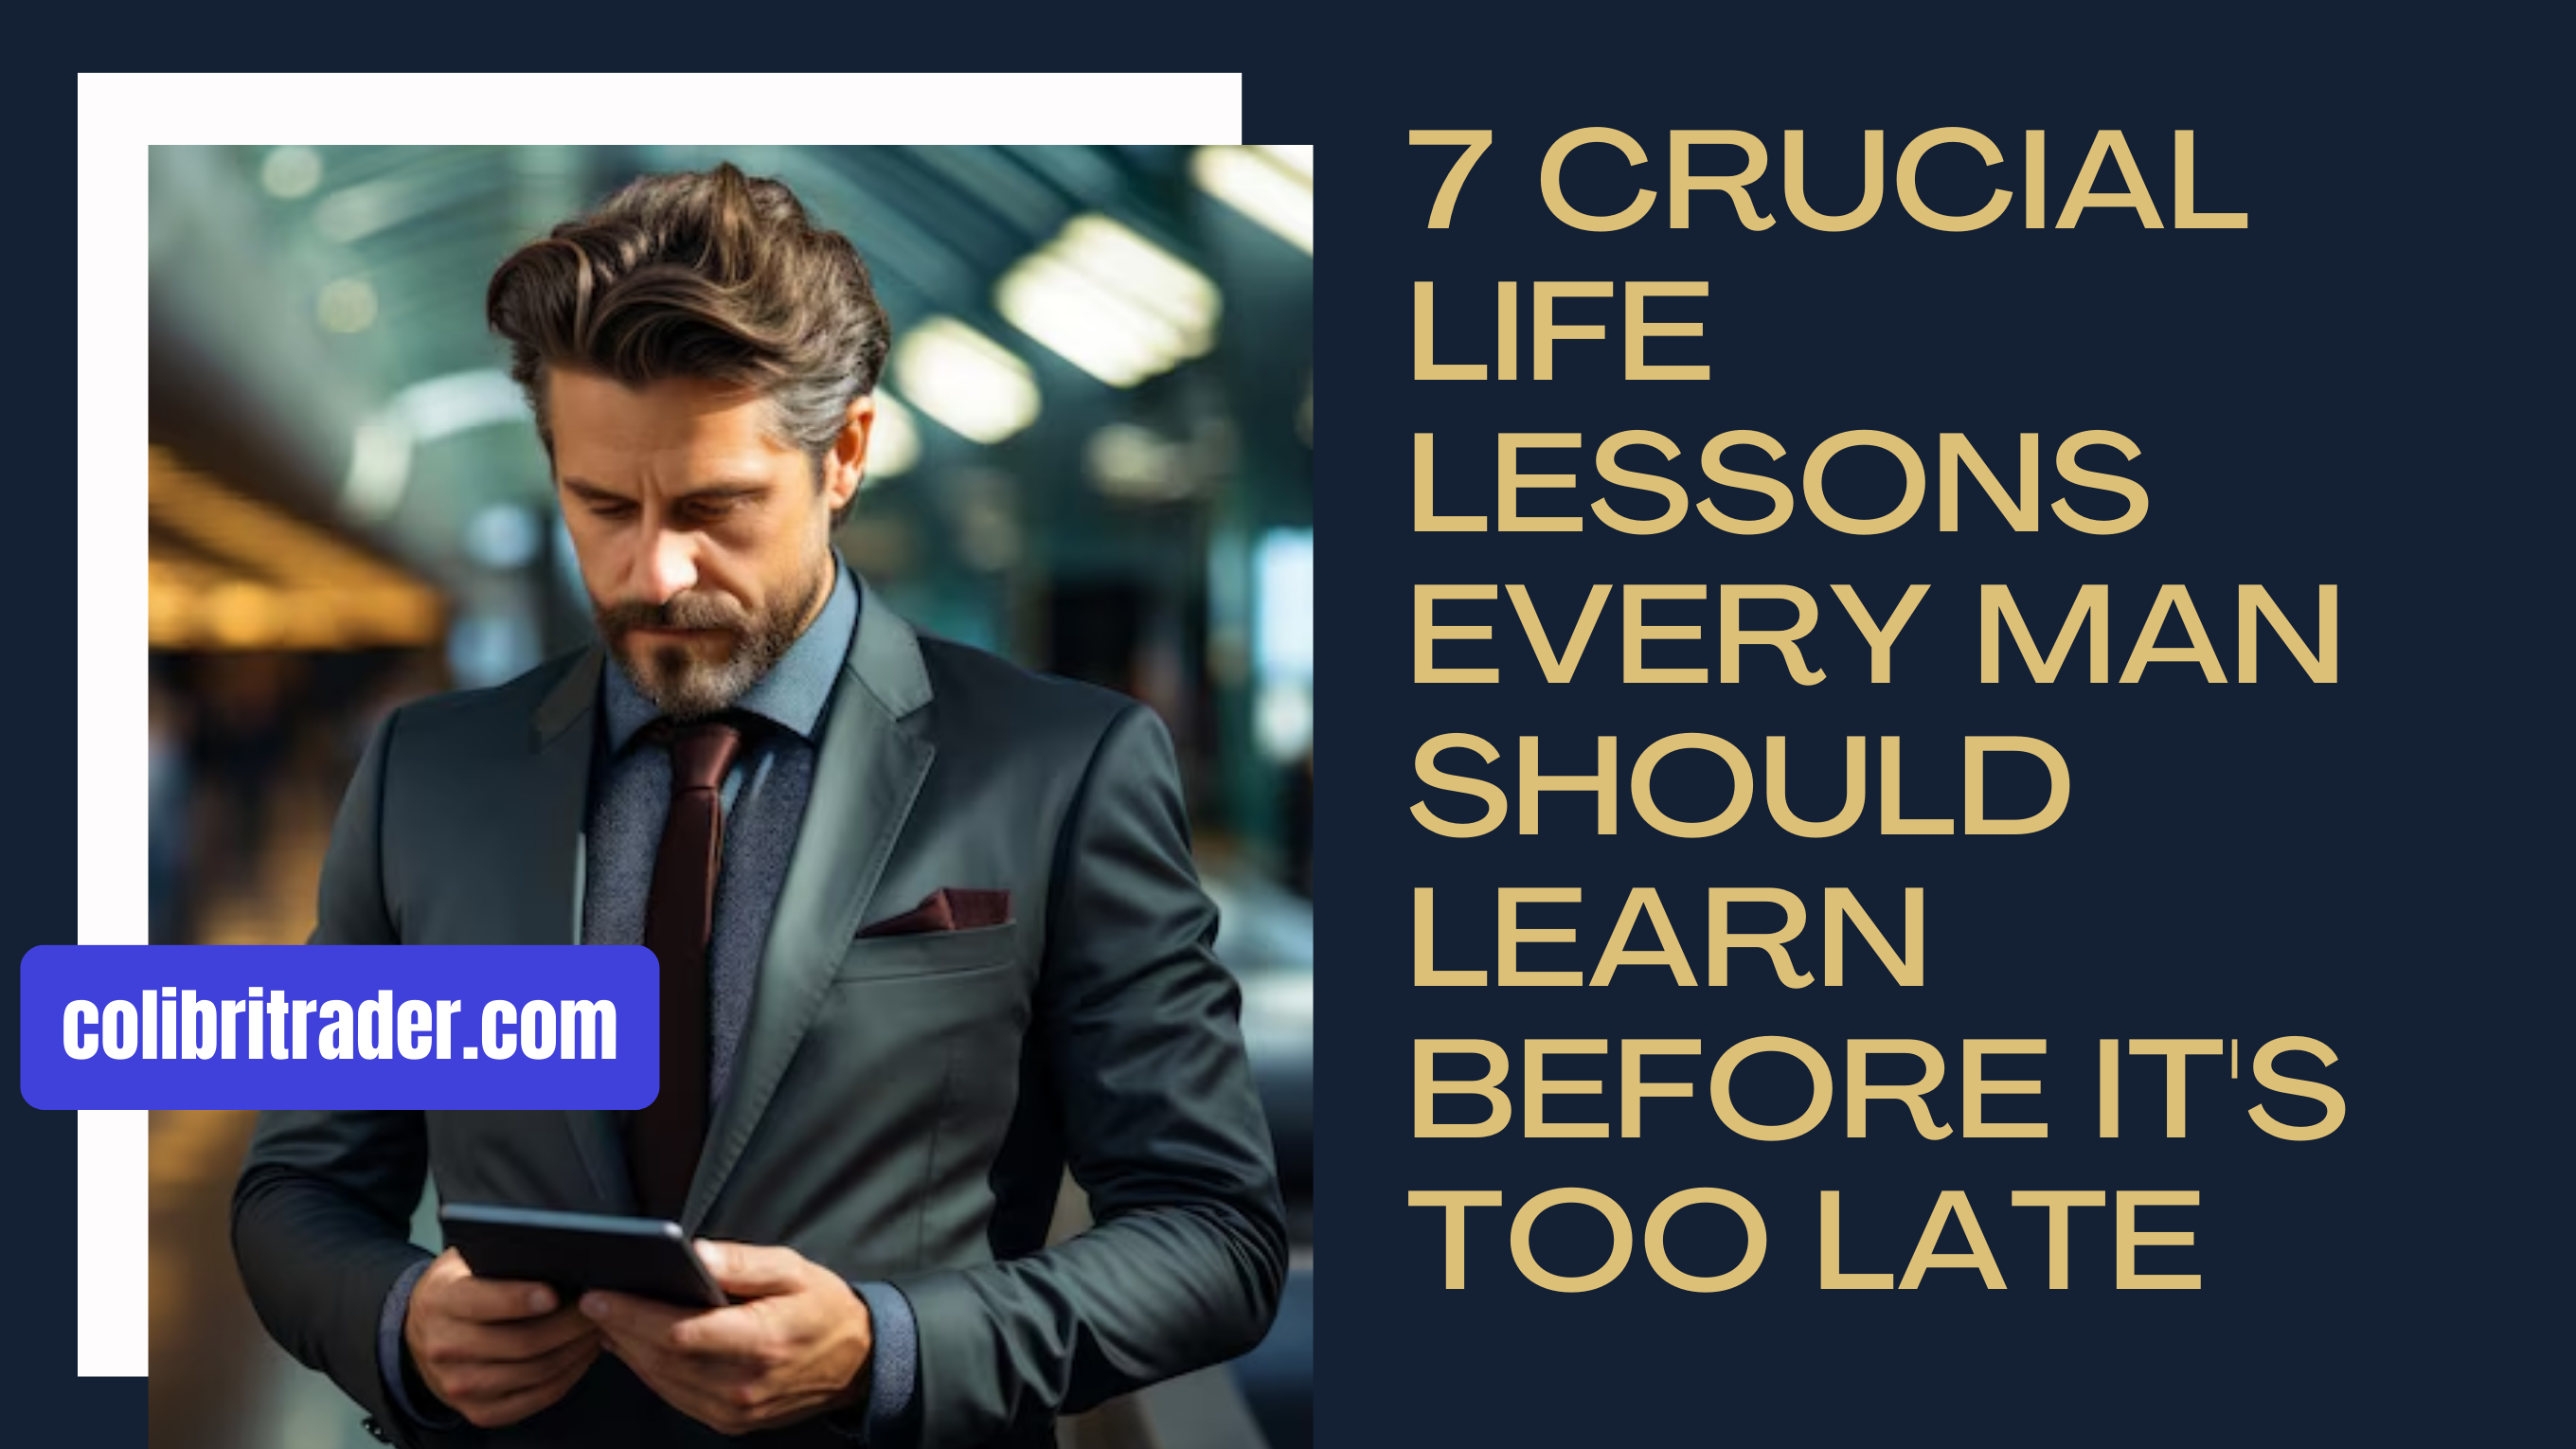 7 Crucial Life Lessons Every Man Should Learn Before It's Too Late